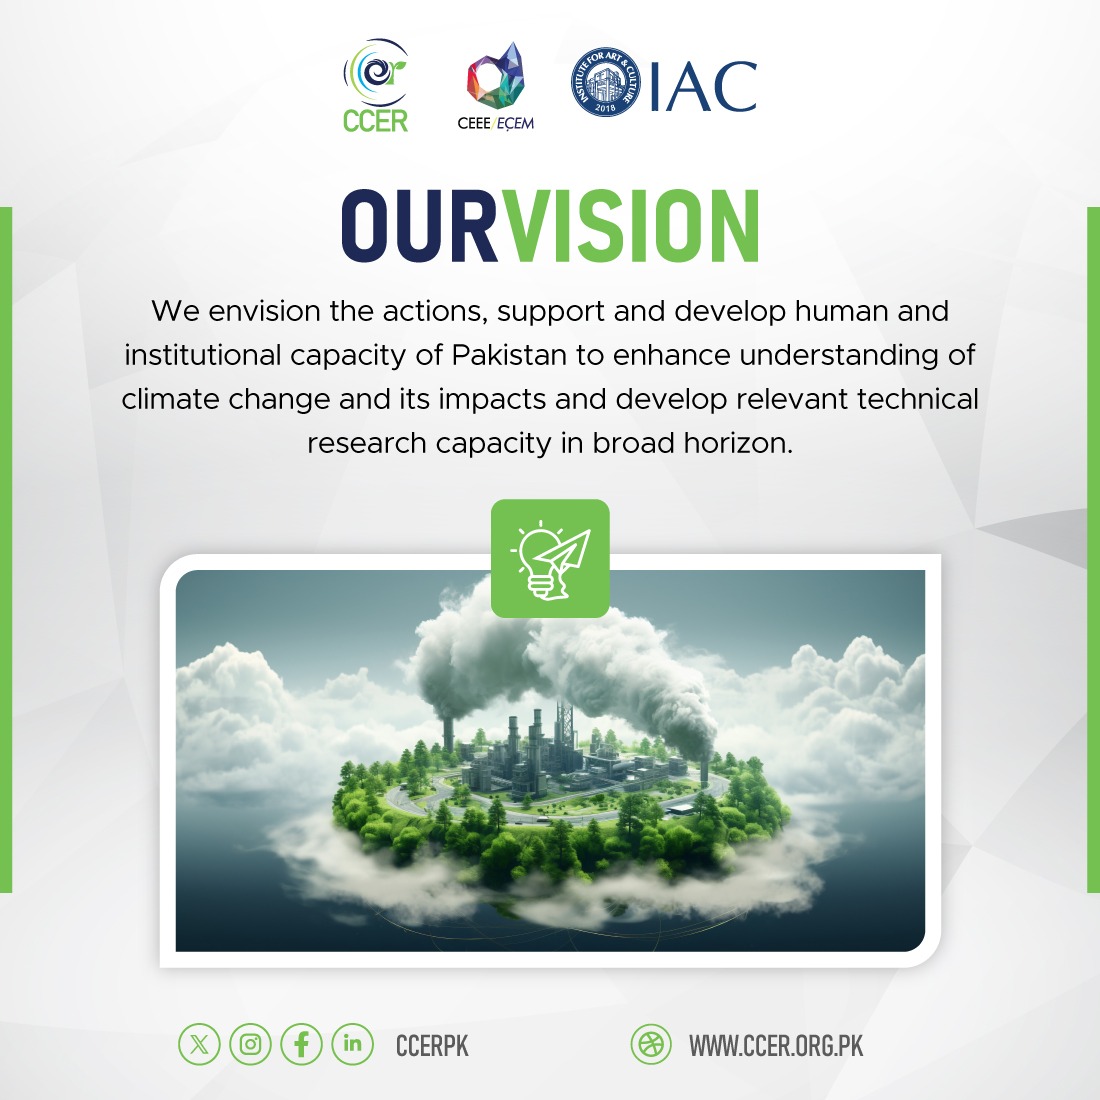 We envision the actions, support, - develop the human & institutional capacity of Pakistan to enhance understanding of climate change & its impacts & develop technical research capacity in a broad horizon.
ccer.org.pk

#climatecontrol #ccerpk #research #iacofficials